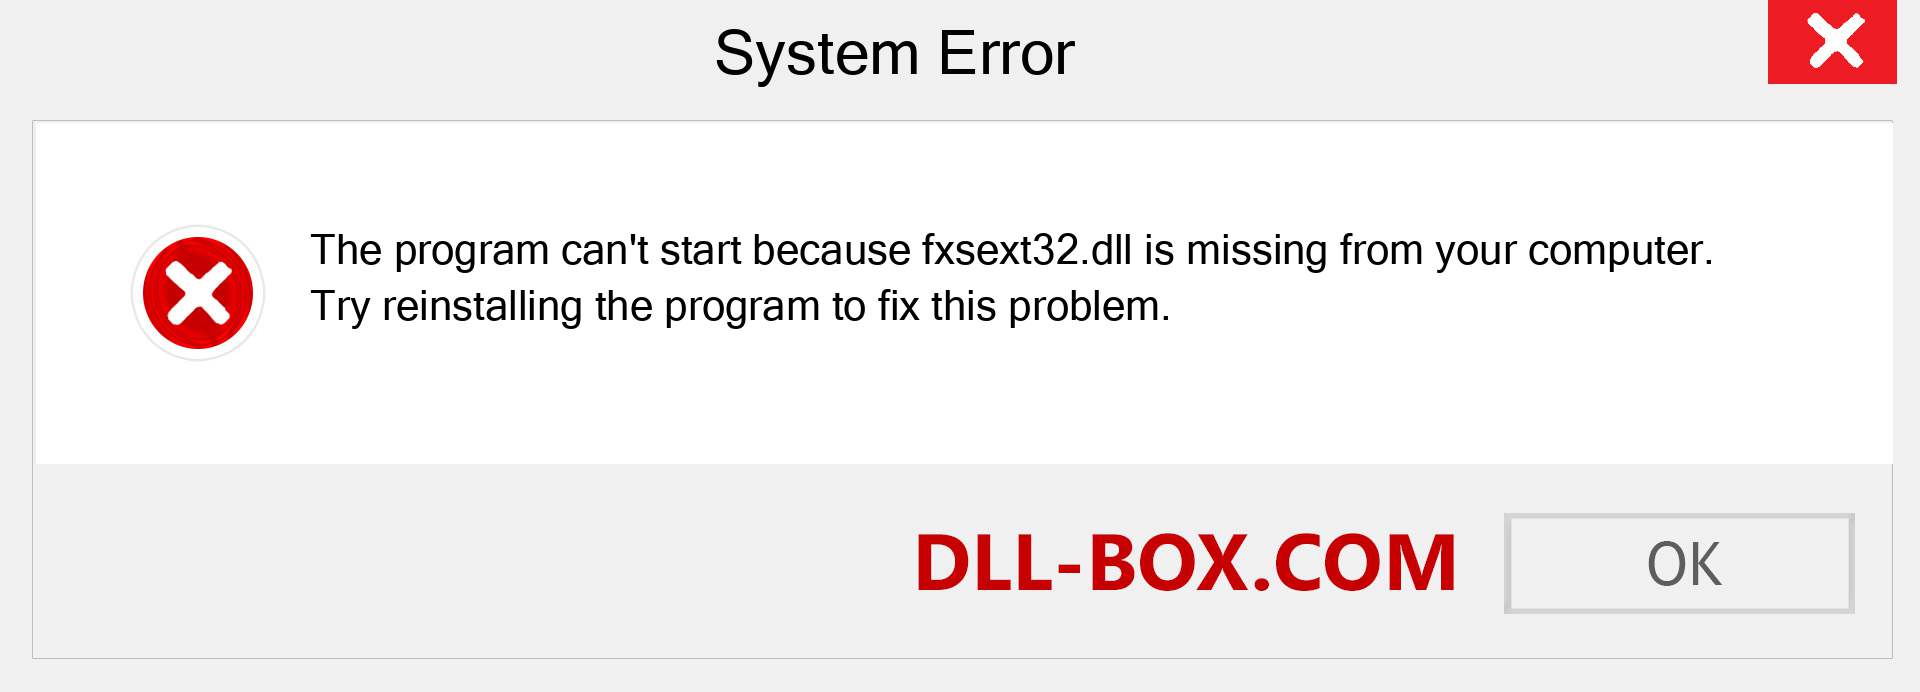  fxsext32.dll file is missing?. Download for Windows 7, 8, 10 - Fix  fxsext32 dll Missing Error on Windows, photos, images